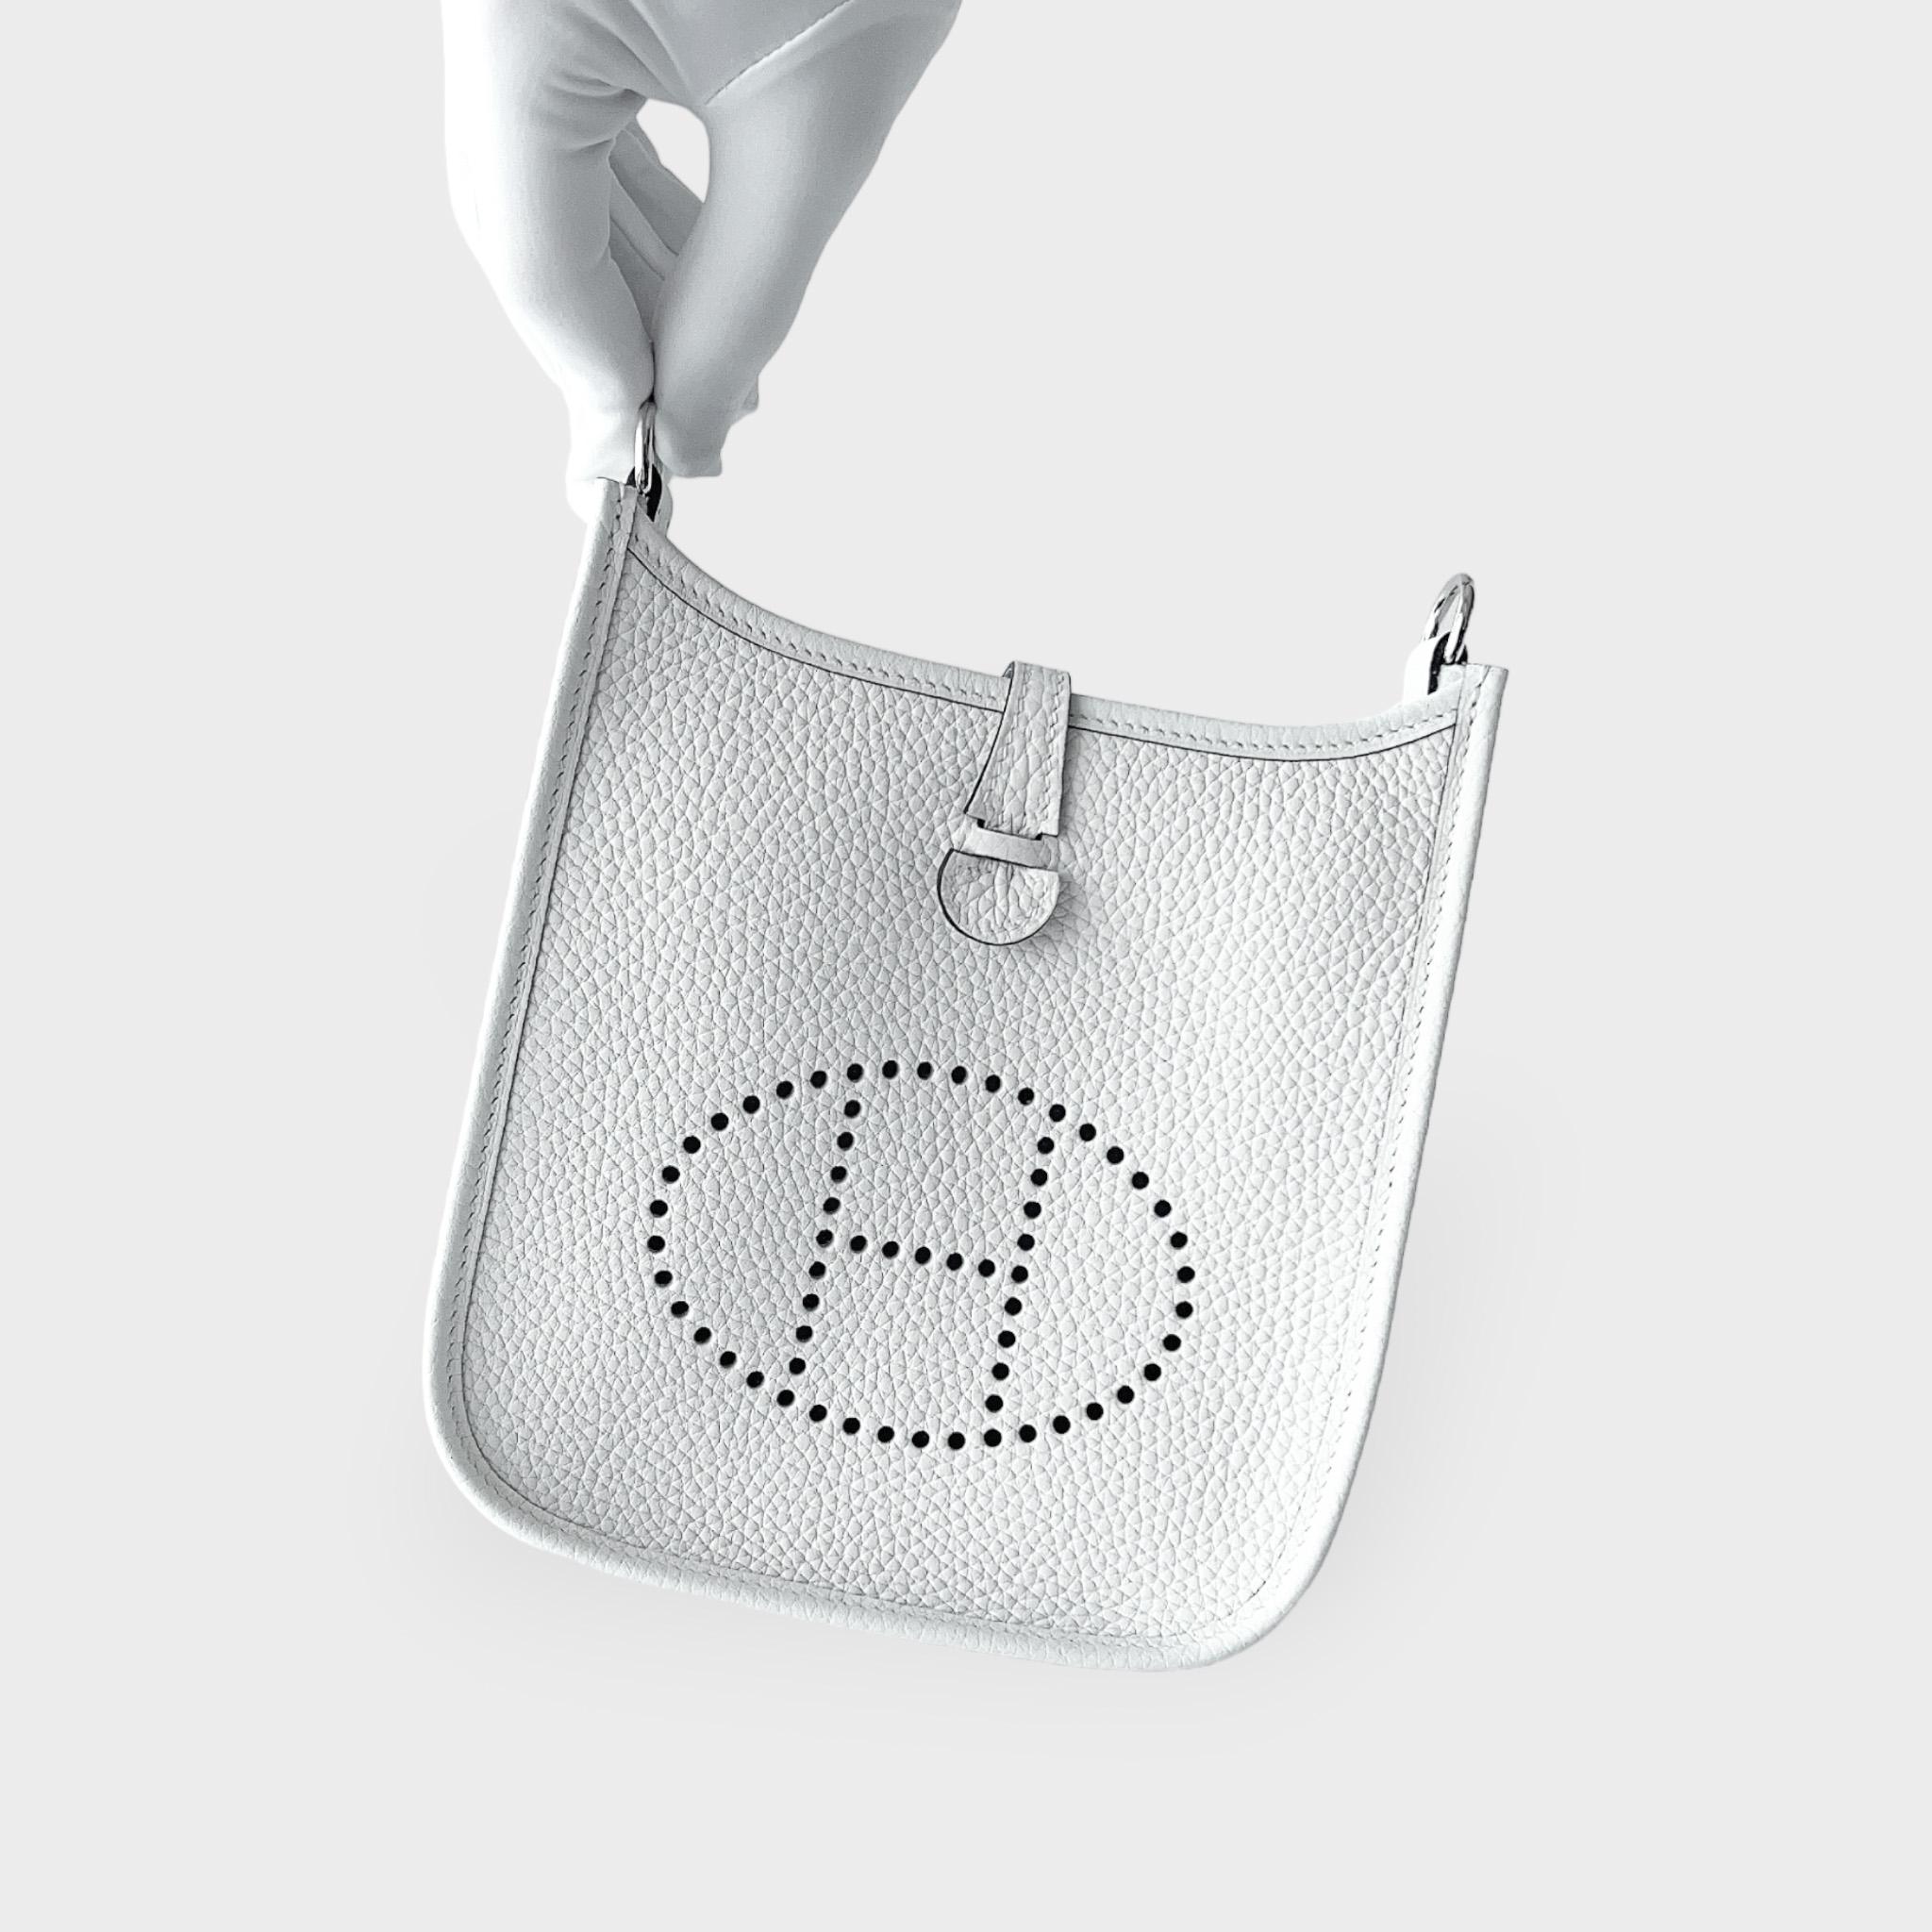 The Hermes Mini Evelyne 16 in New White is a casual design that can be used for your everyday routine. This is the smallest size Hermes Evelyne bag and is made from handcrafted New White Clemence leather, making it harder to scratch or become